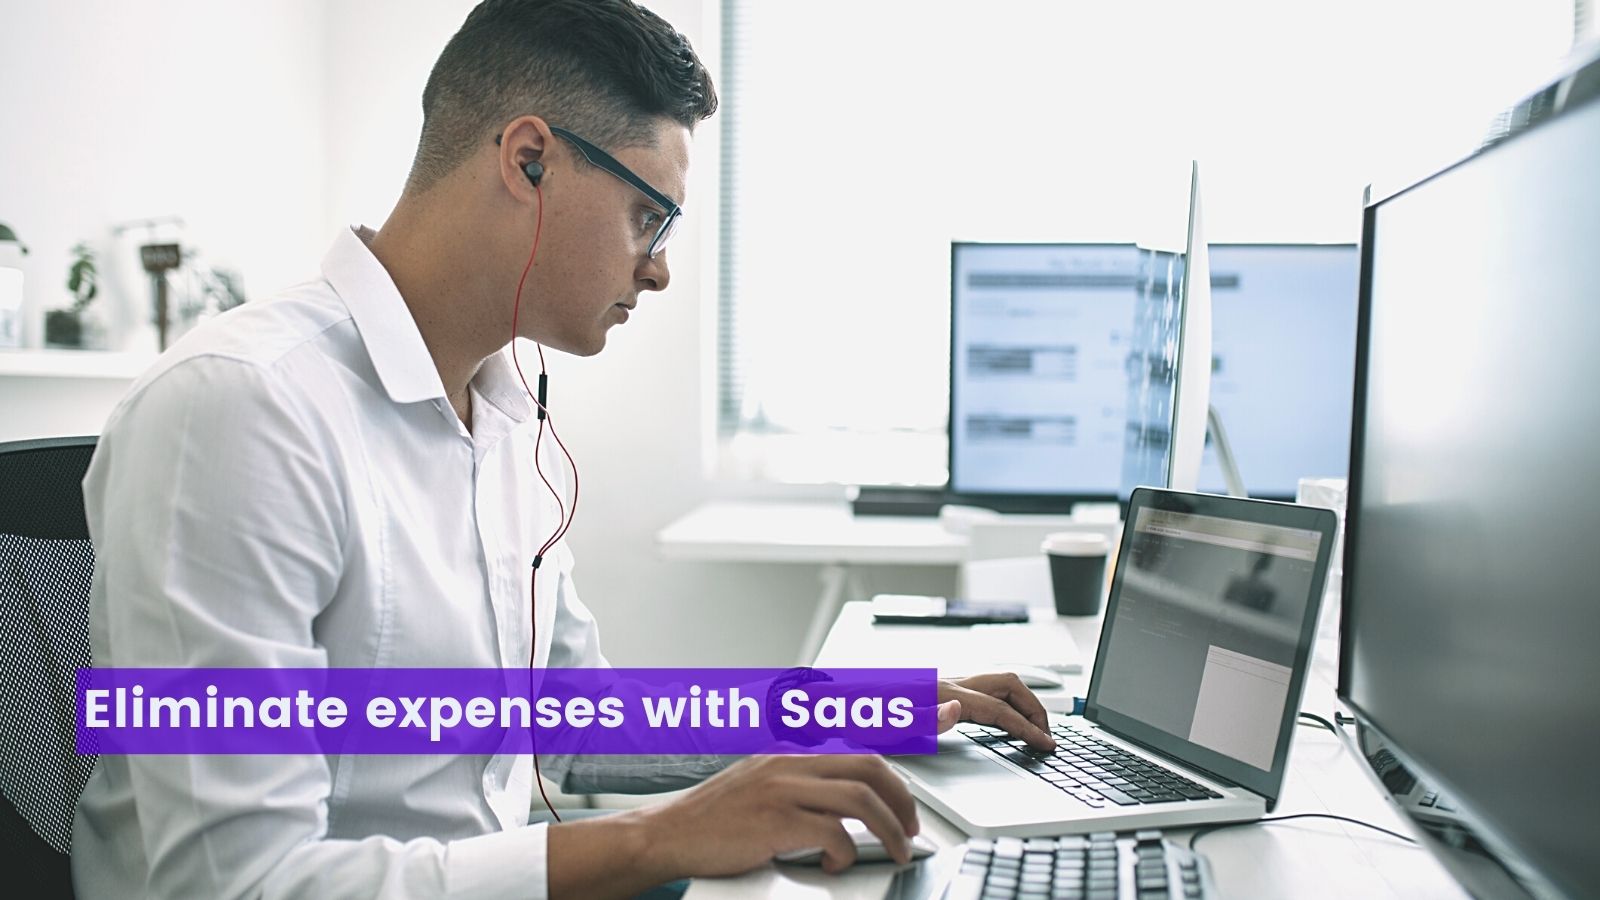 Lowering expenses with Saas on agilitycms.com